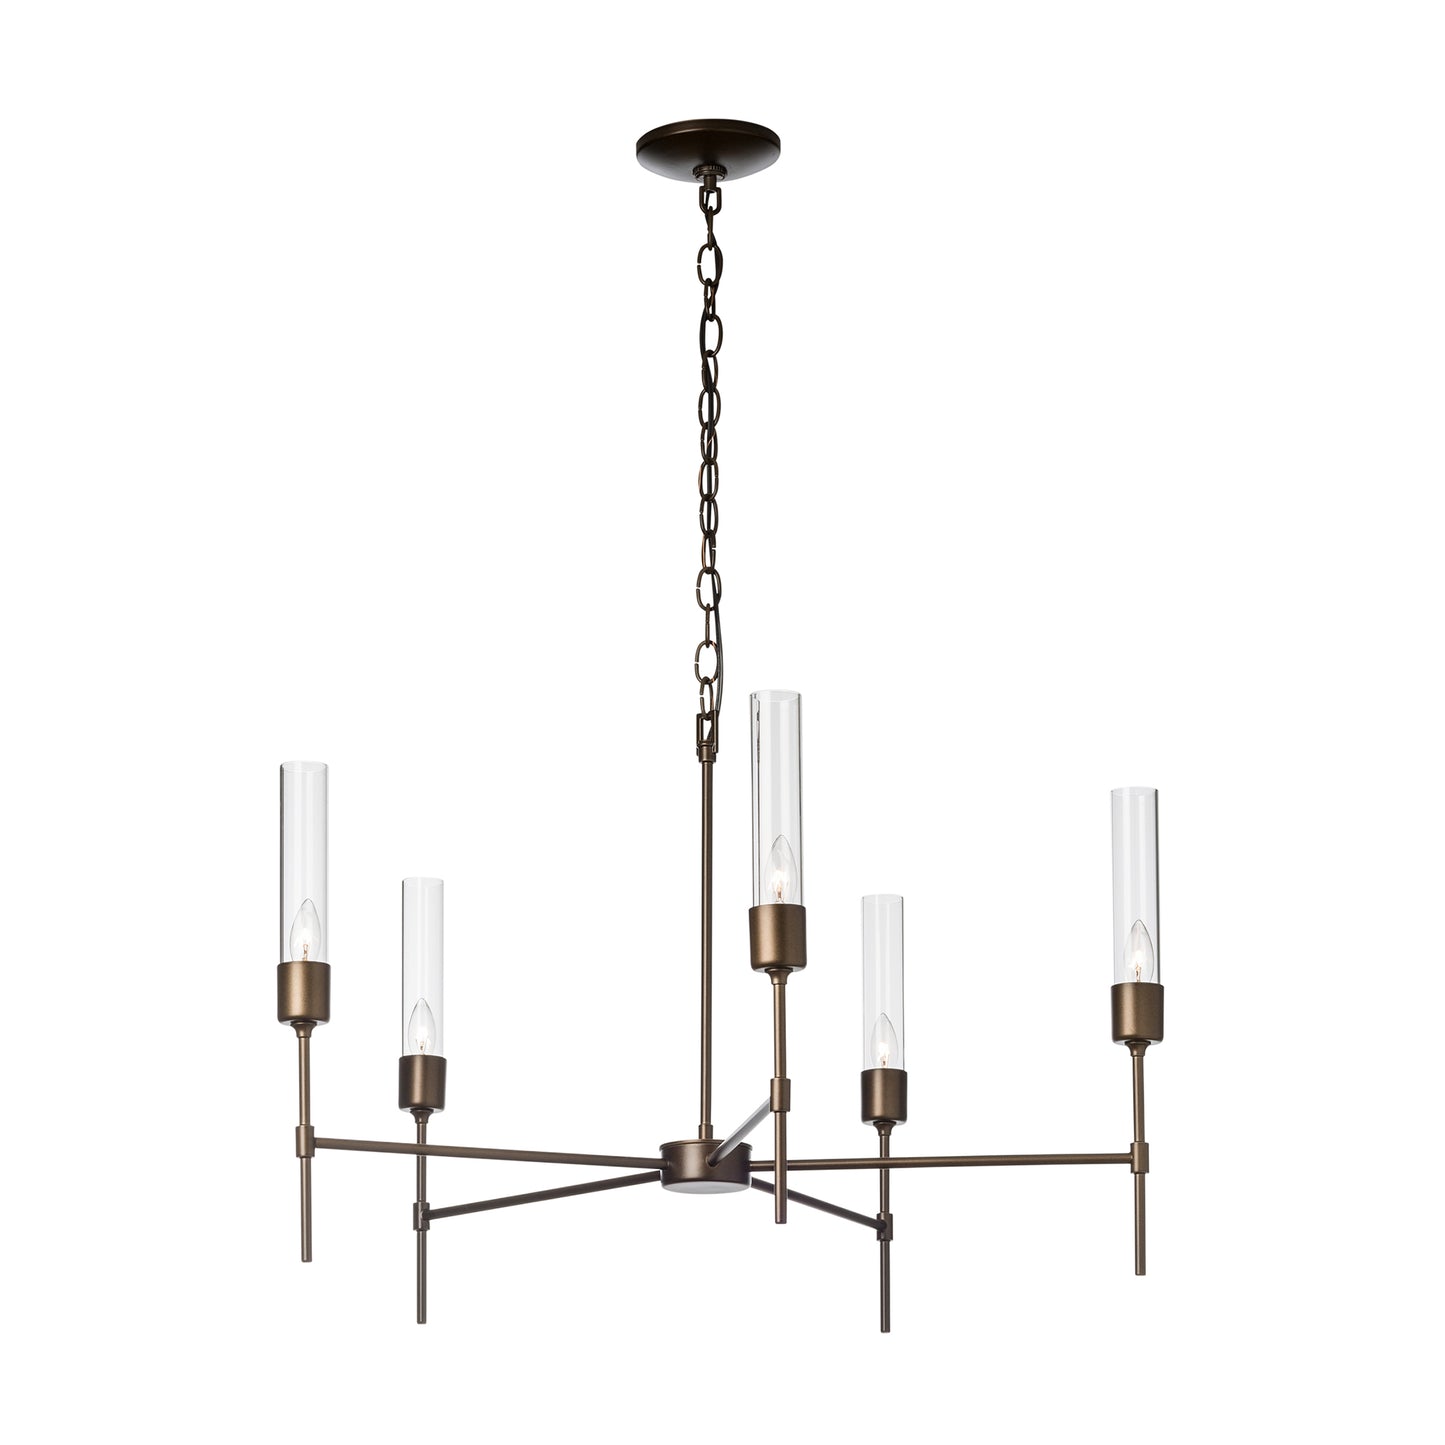 A Hubbardton Forge Vela 5-Arm Chandelier with four lights and a glass shade.